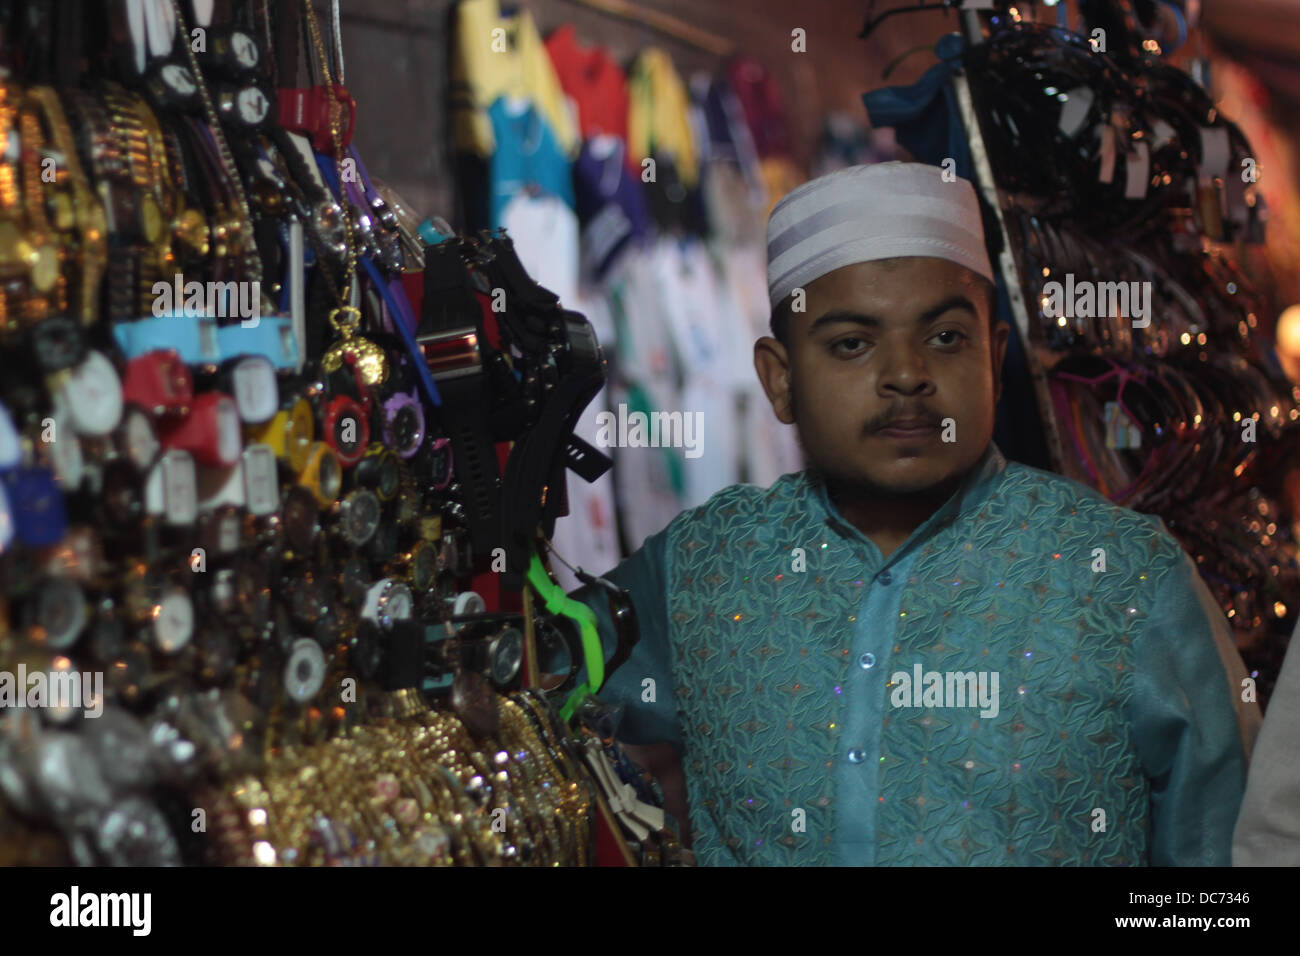 A Muslim hawker looks pensively in Delhi, India. Stock Photo